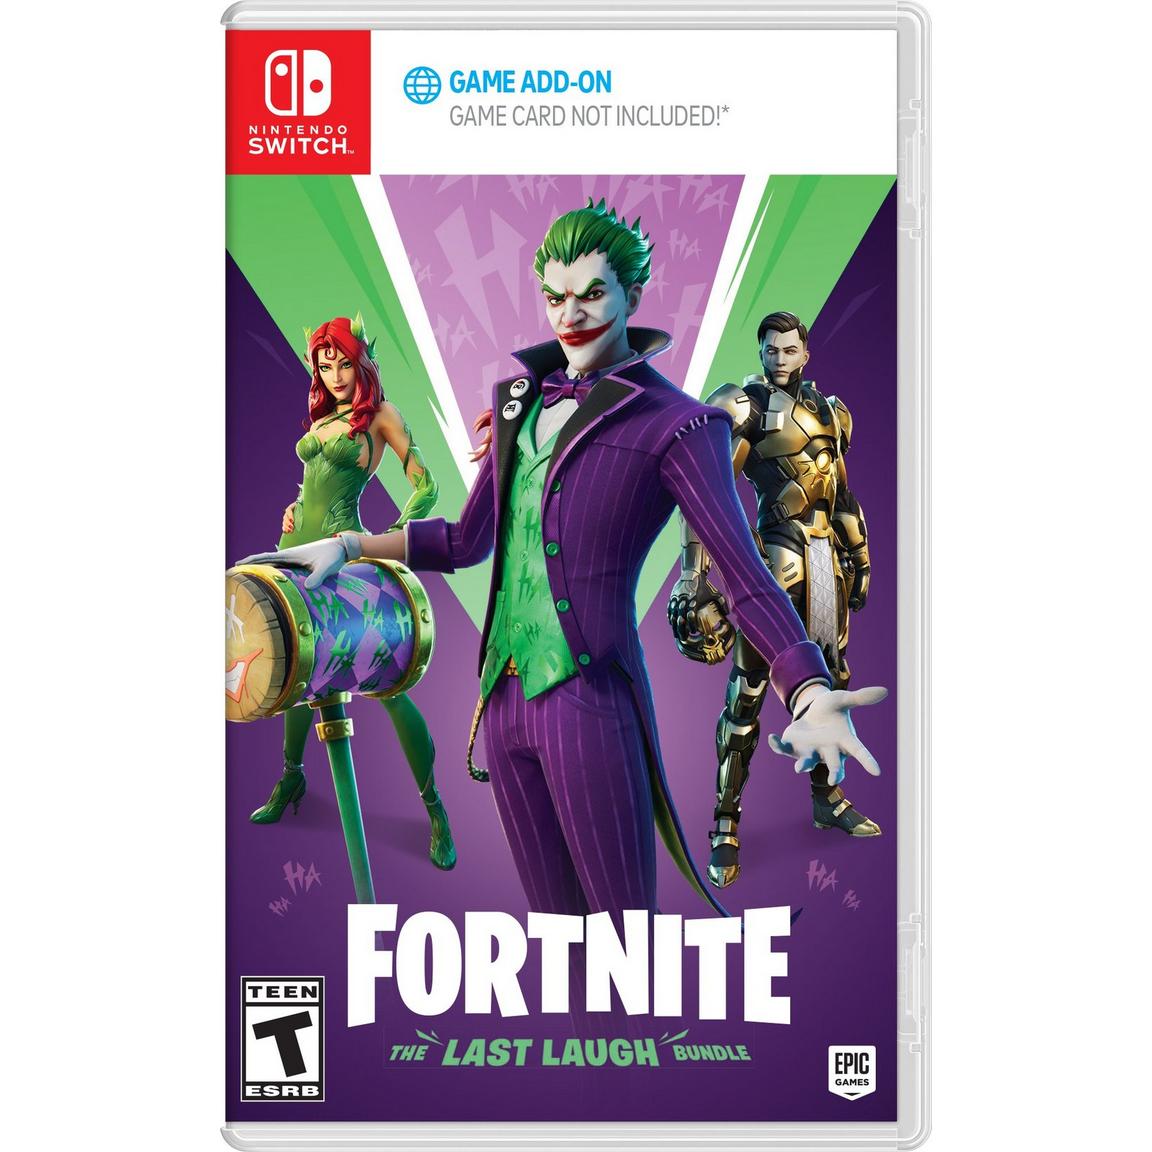 Fortnite: The Last Laugh Bundle - Xbox One/ Nintendo Switch/ Playstation 4 / Playstation 5 for $14.99